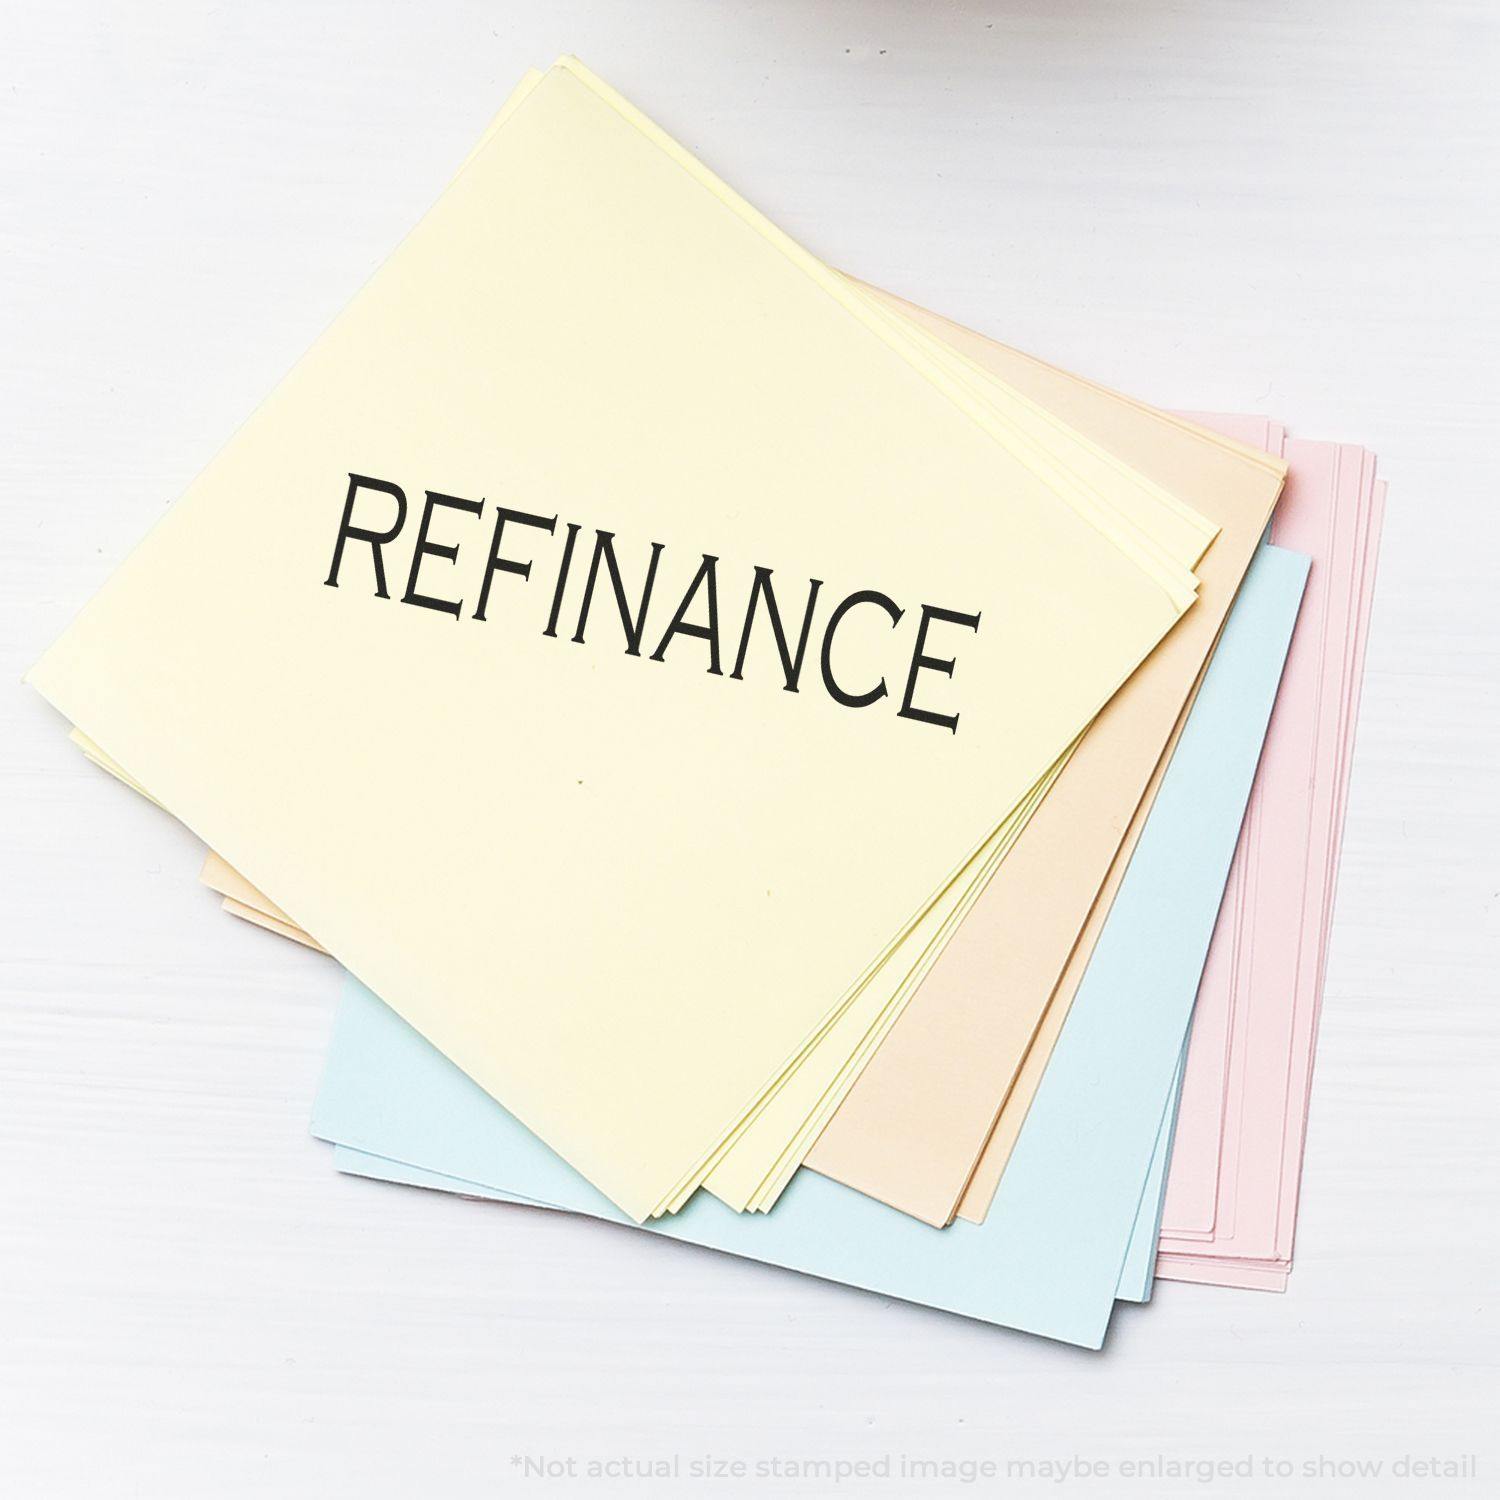 A stock office rubber stamp with a stamped image showing how the text "REFINANCE" is displayed after stamping.